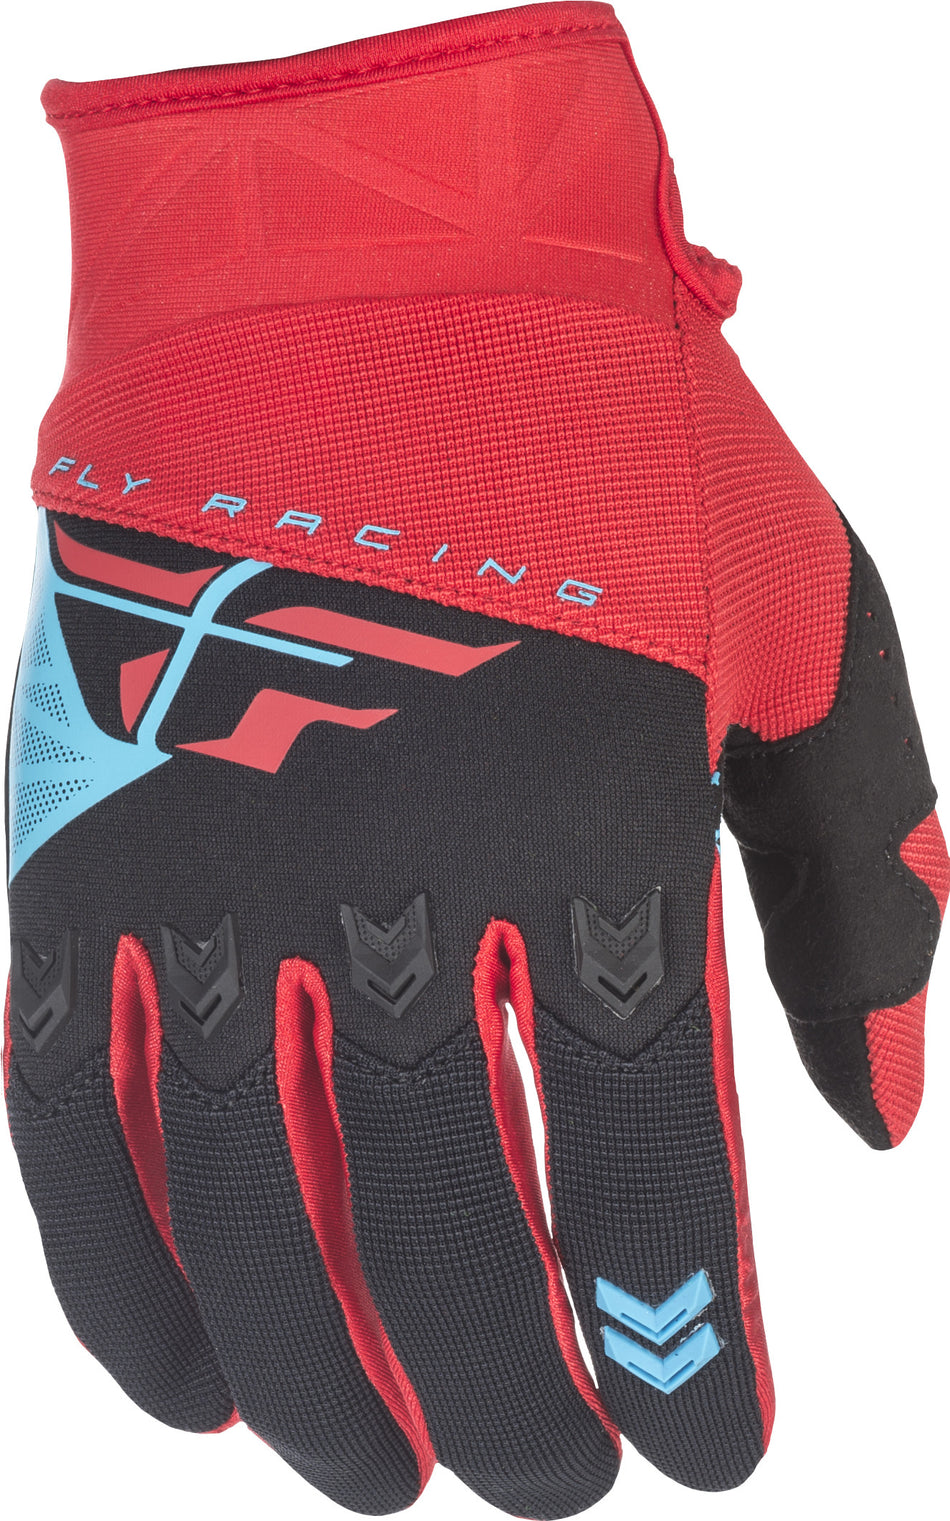 FLY RACING F-16 Gloves Red/Black Sz 2 371-91202